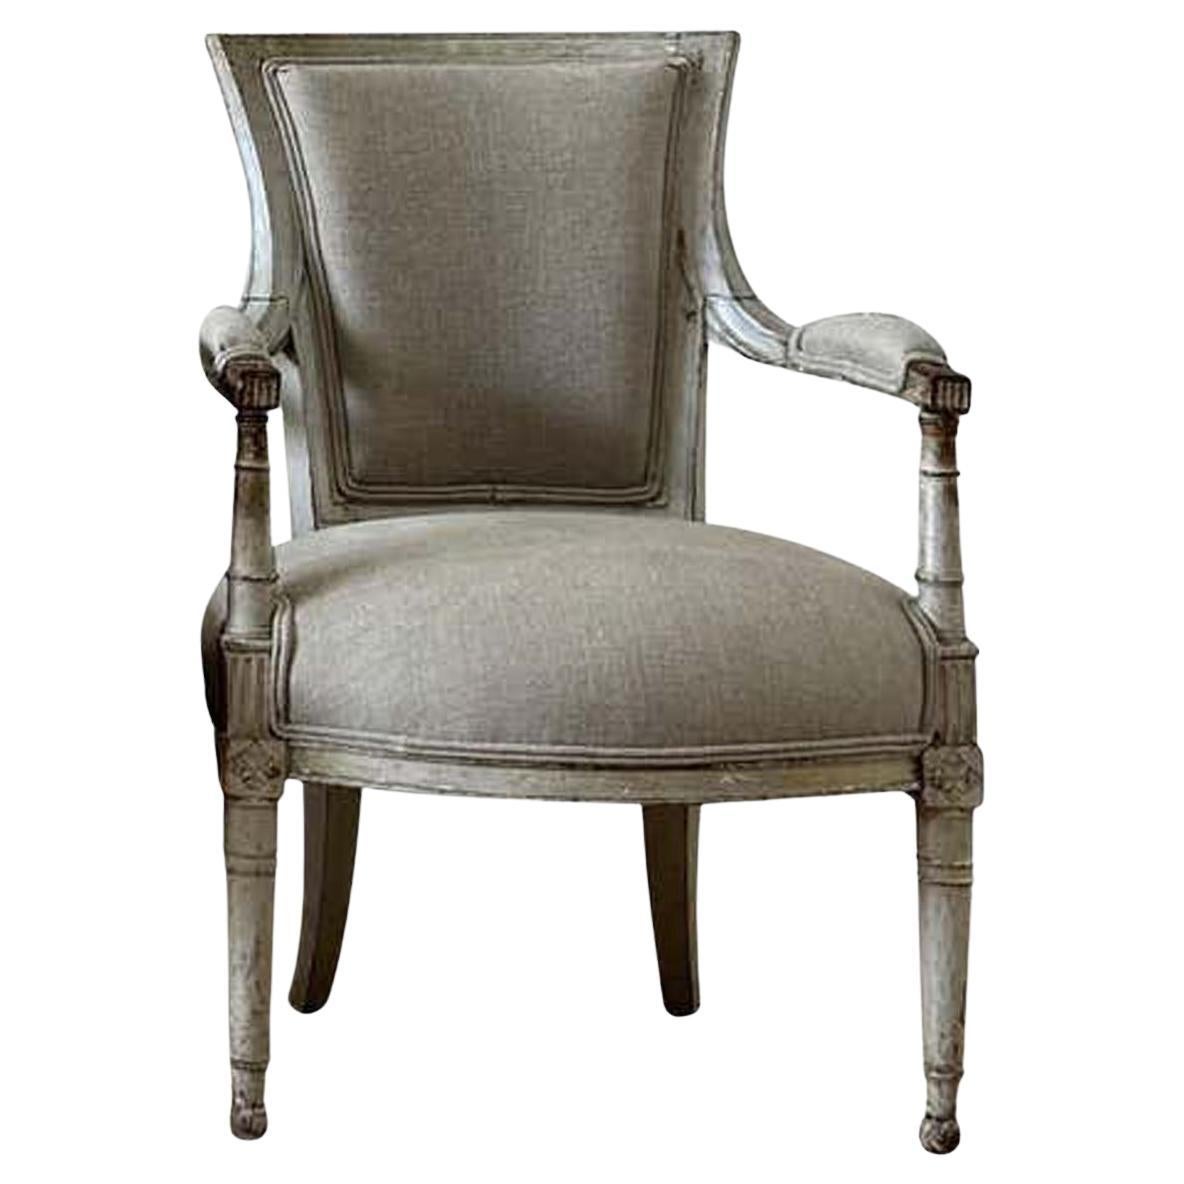 Antique French Painted and Upholstered Directoire Open Arm Chairs